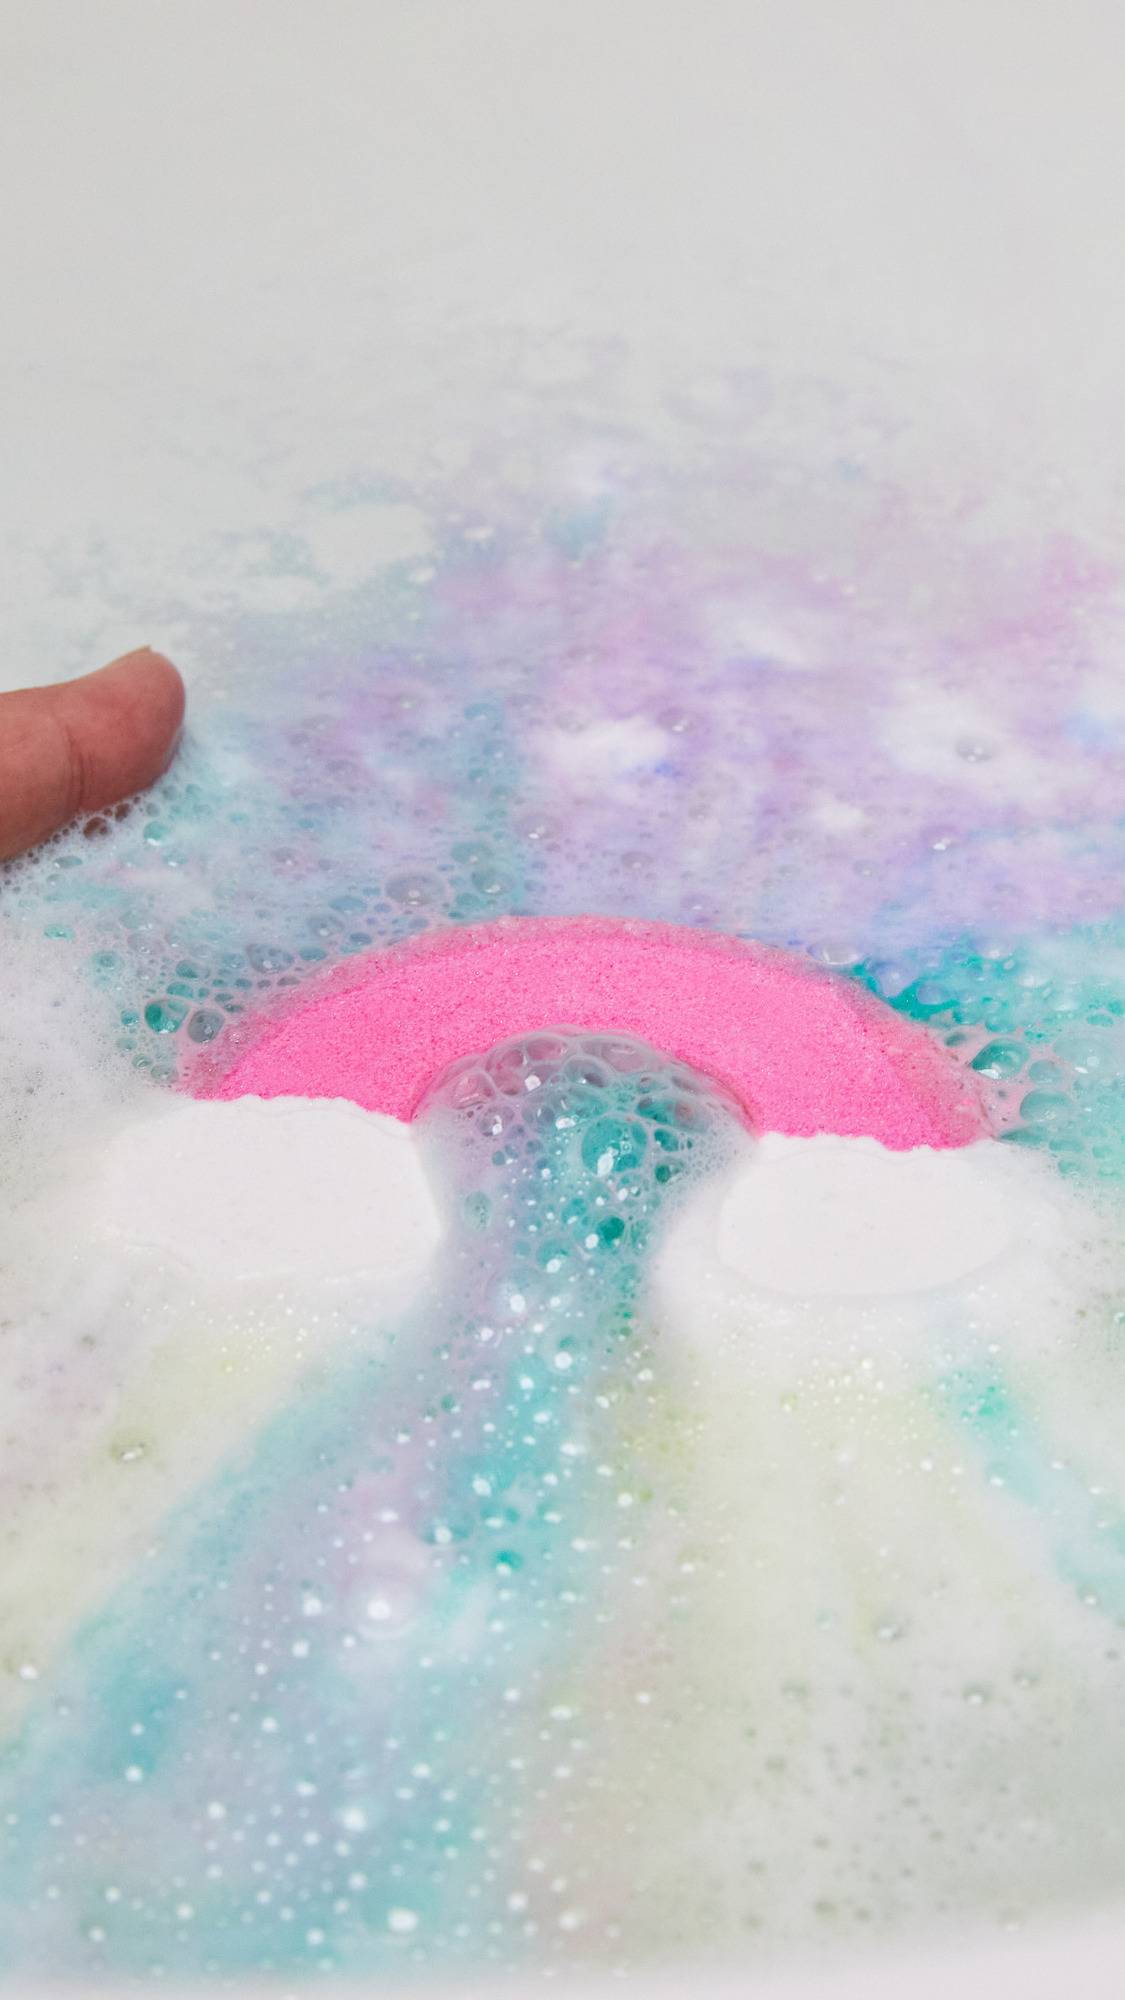 A close-up of the Somewhere bath bomb being placed into the bath water as it immediately ripples out pastel blue, pink and purple.